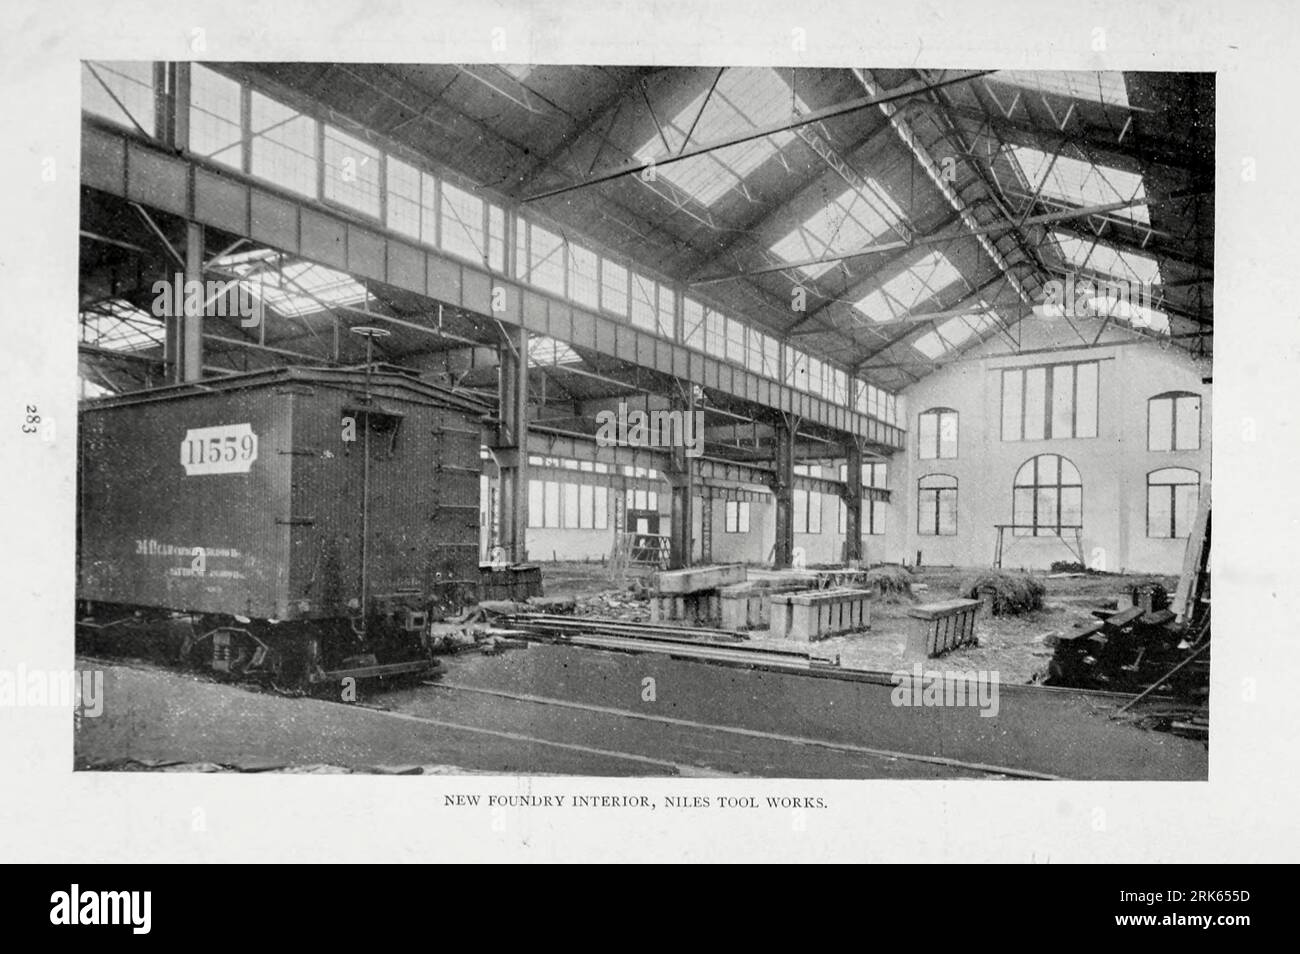 New Foundry Interior Niles Tool Works, Hamilton, Ohio from the Article MODERN MACHINE-SHOP ECONOMICS PRIME REQUISITES OF SHOP CONSTRUCTION By Horace L. Arnold from The Engineering Magazine DEVOTED TO INDUSTRIAL PROGRESS Volume XI October 1896 NEW YORK The Engineering Magazine Co Stock Photo